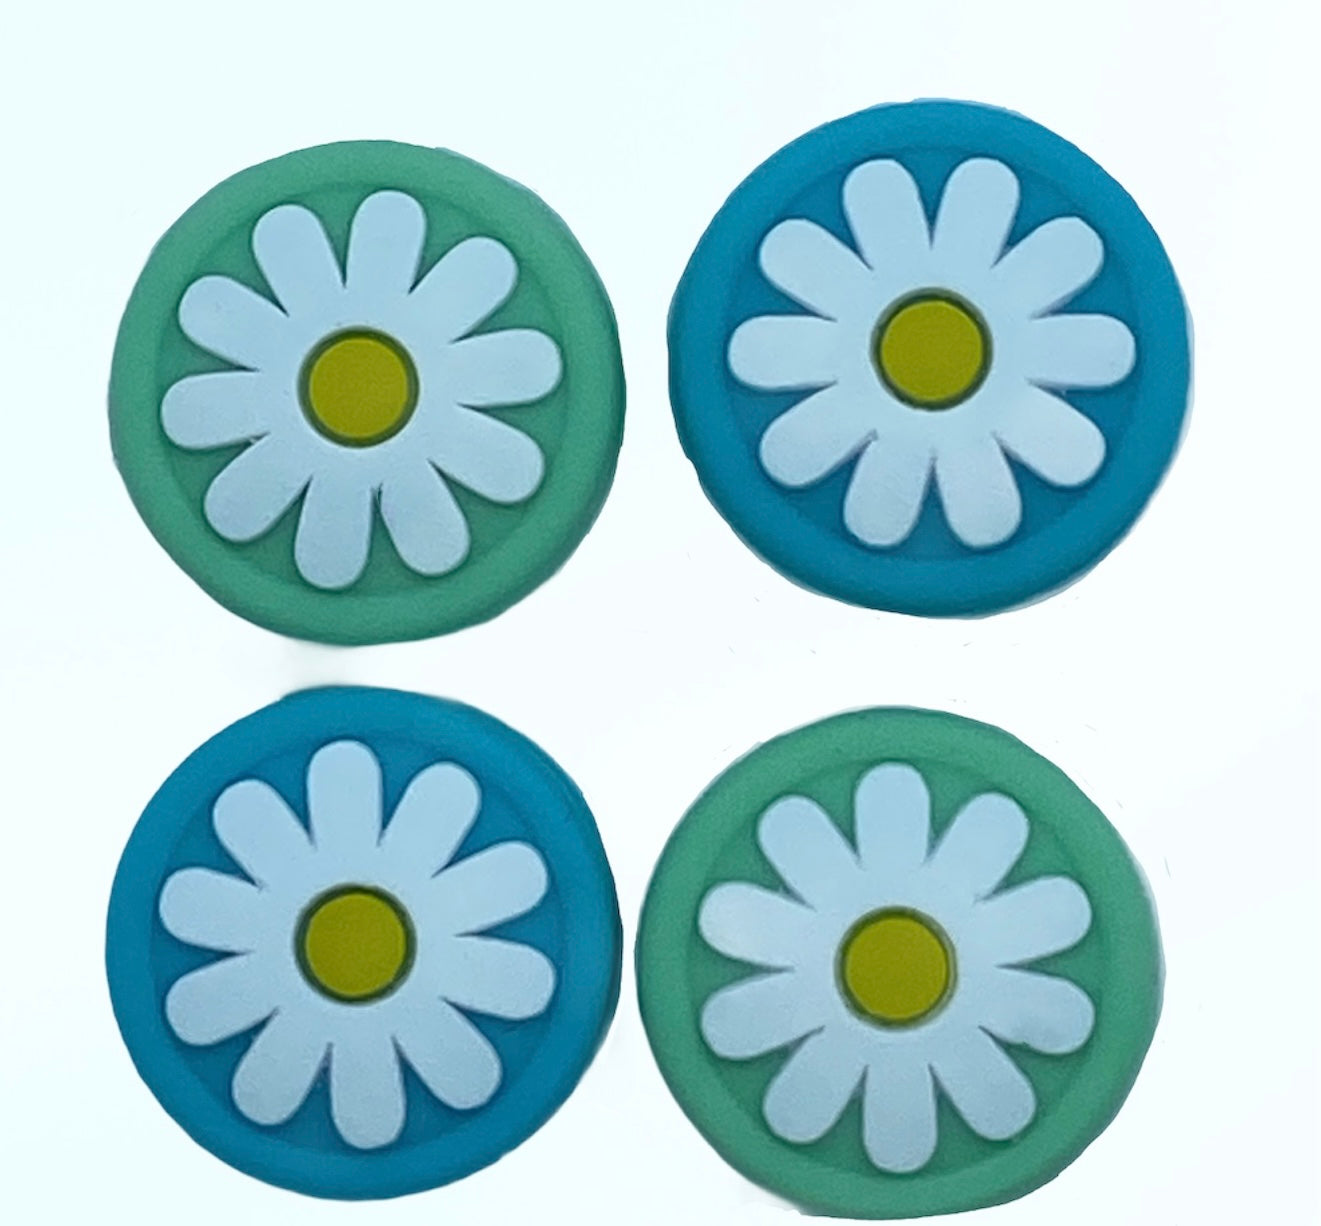 JenDore Green & Blue 4Pcs Flower Silicone Thumb Grip Caps for Nintendo Switch